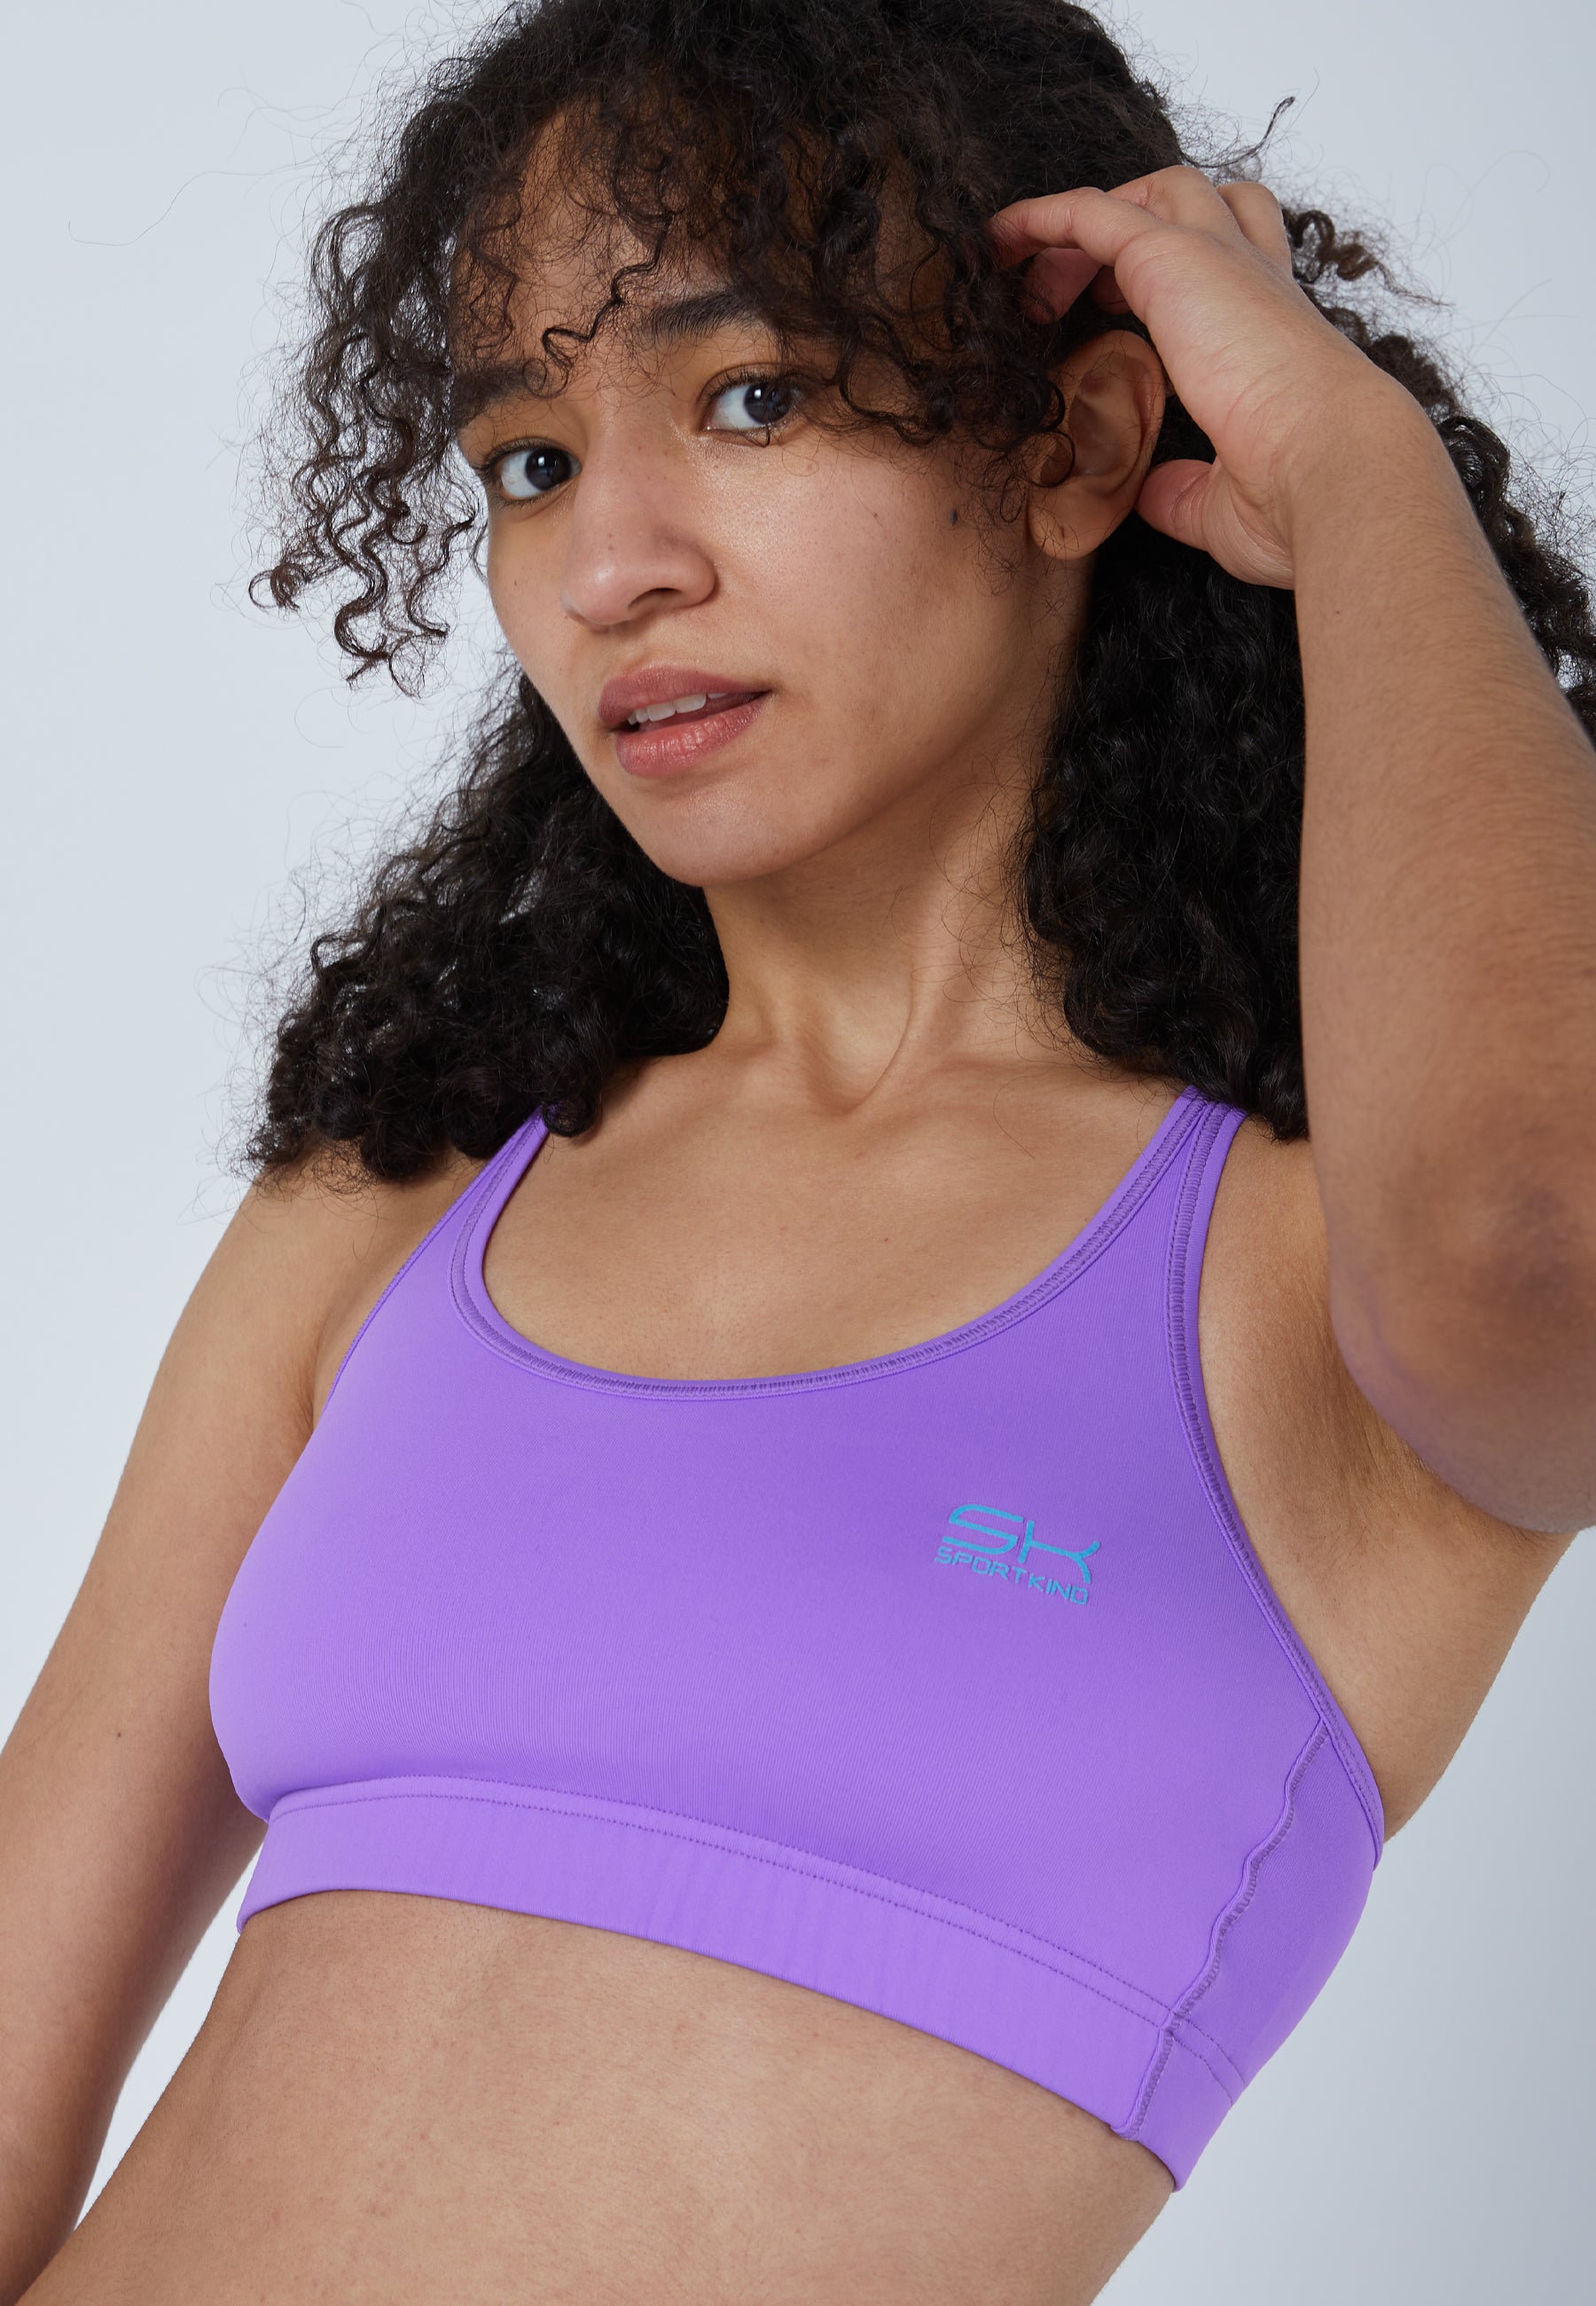 Sports bra with crossed straps in purple for girls and women